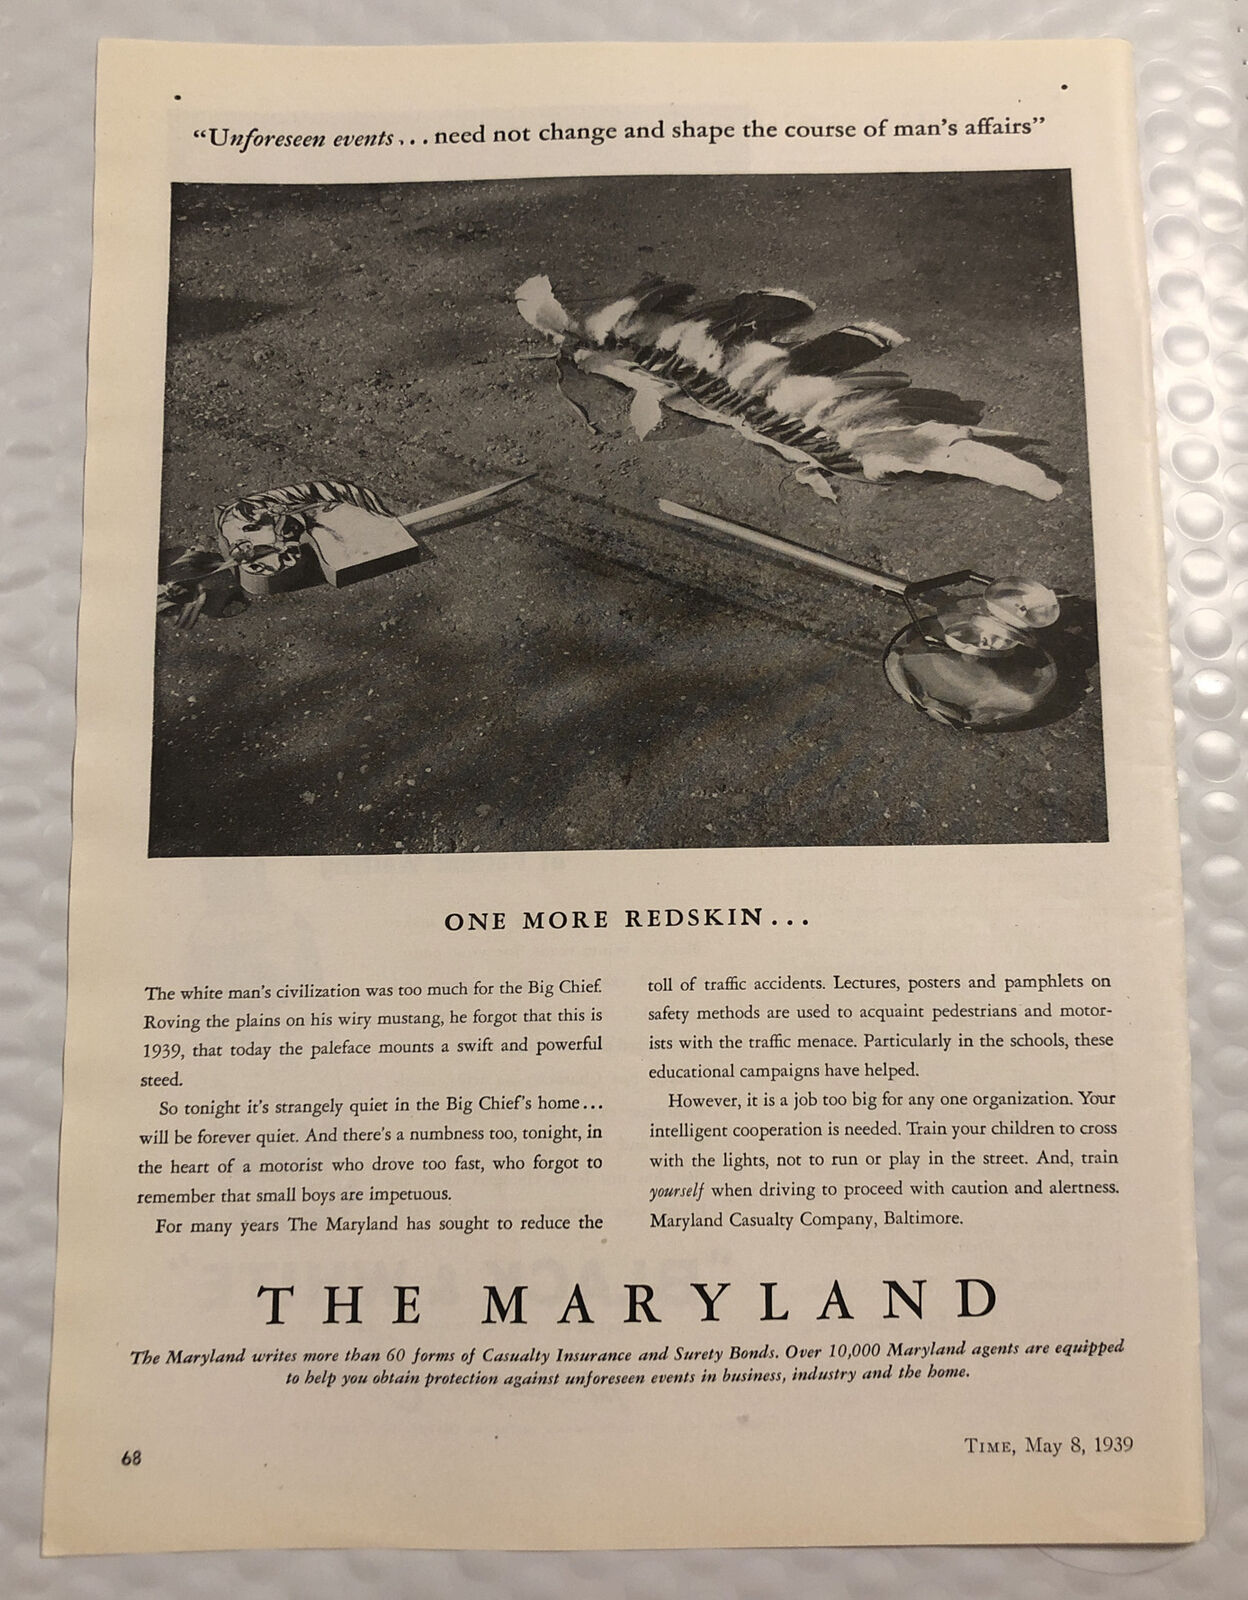 Vintage 1939 The Maryland Insurance Print Ad - Full Page - One More Redskin